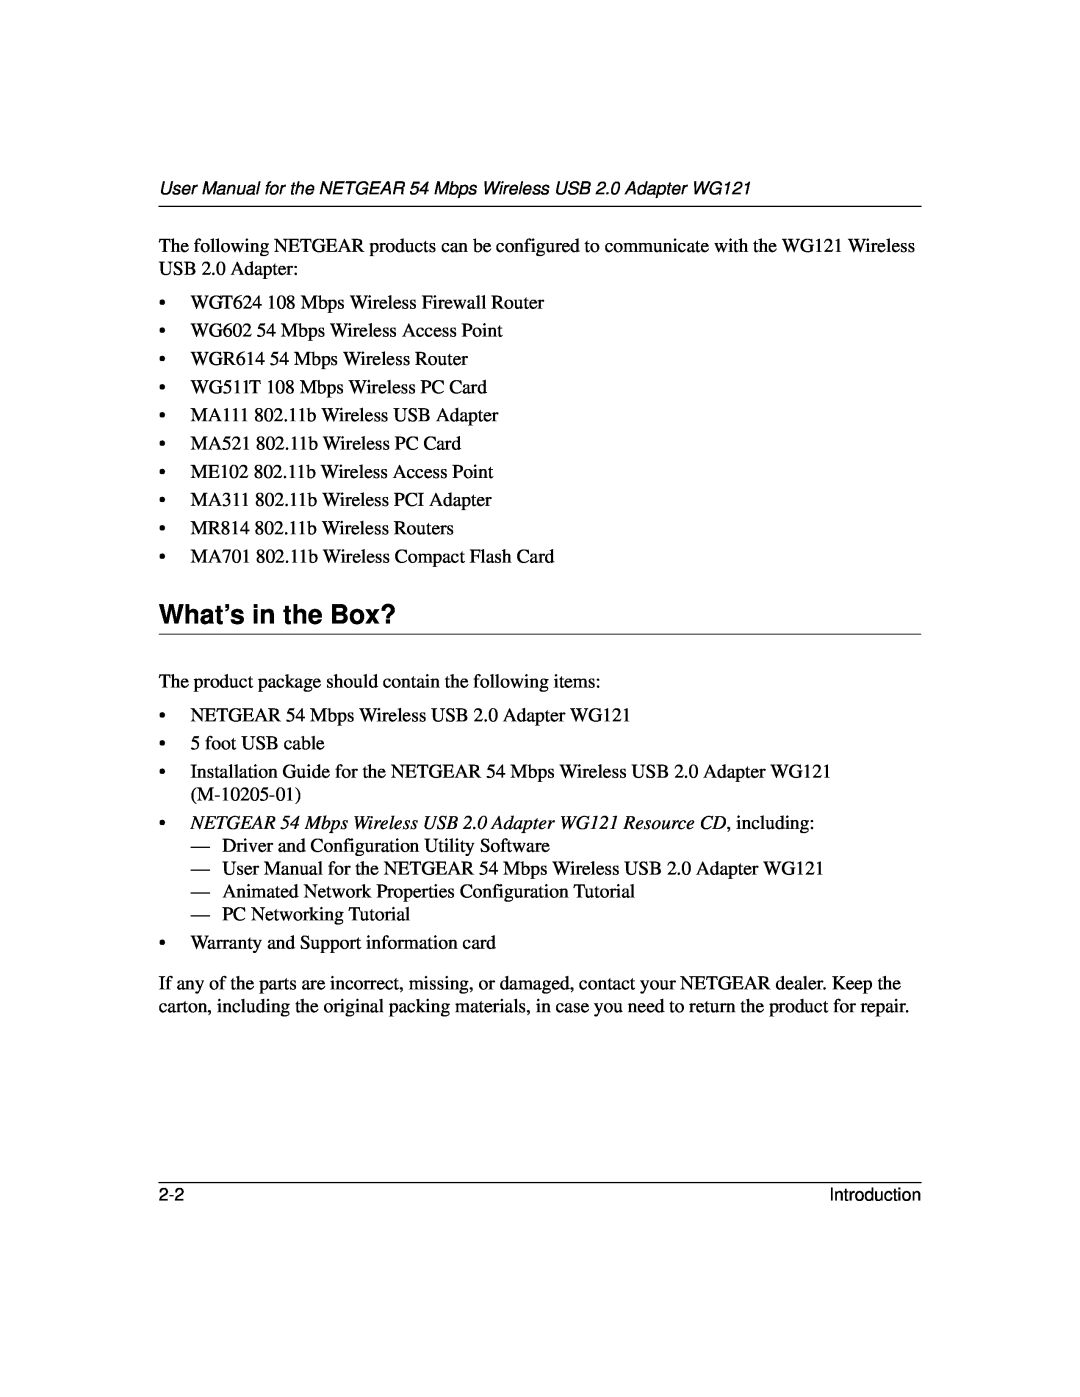 NETGEAR user manual What’s in the Box?, NETGEAR 54 Mbps Wireless USB 2.0 Adapter WG121 Resource CD, including 